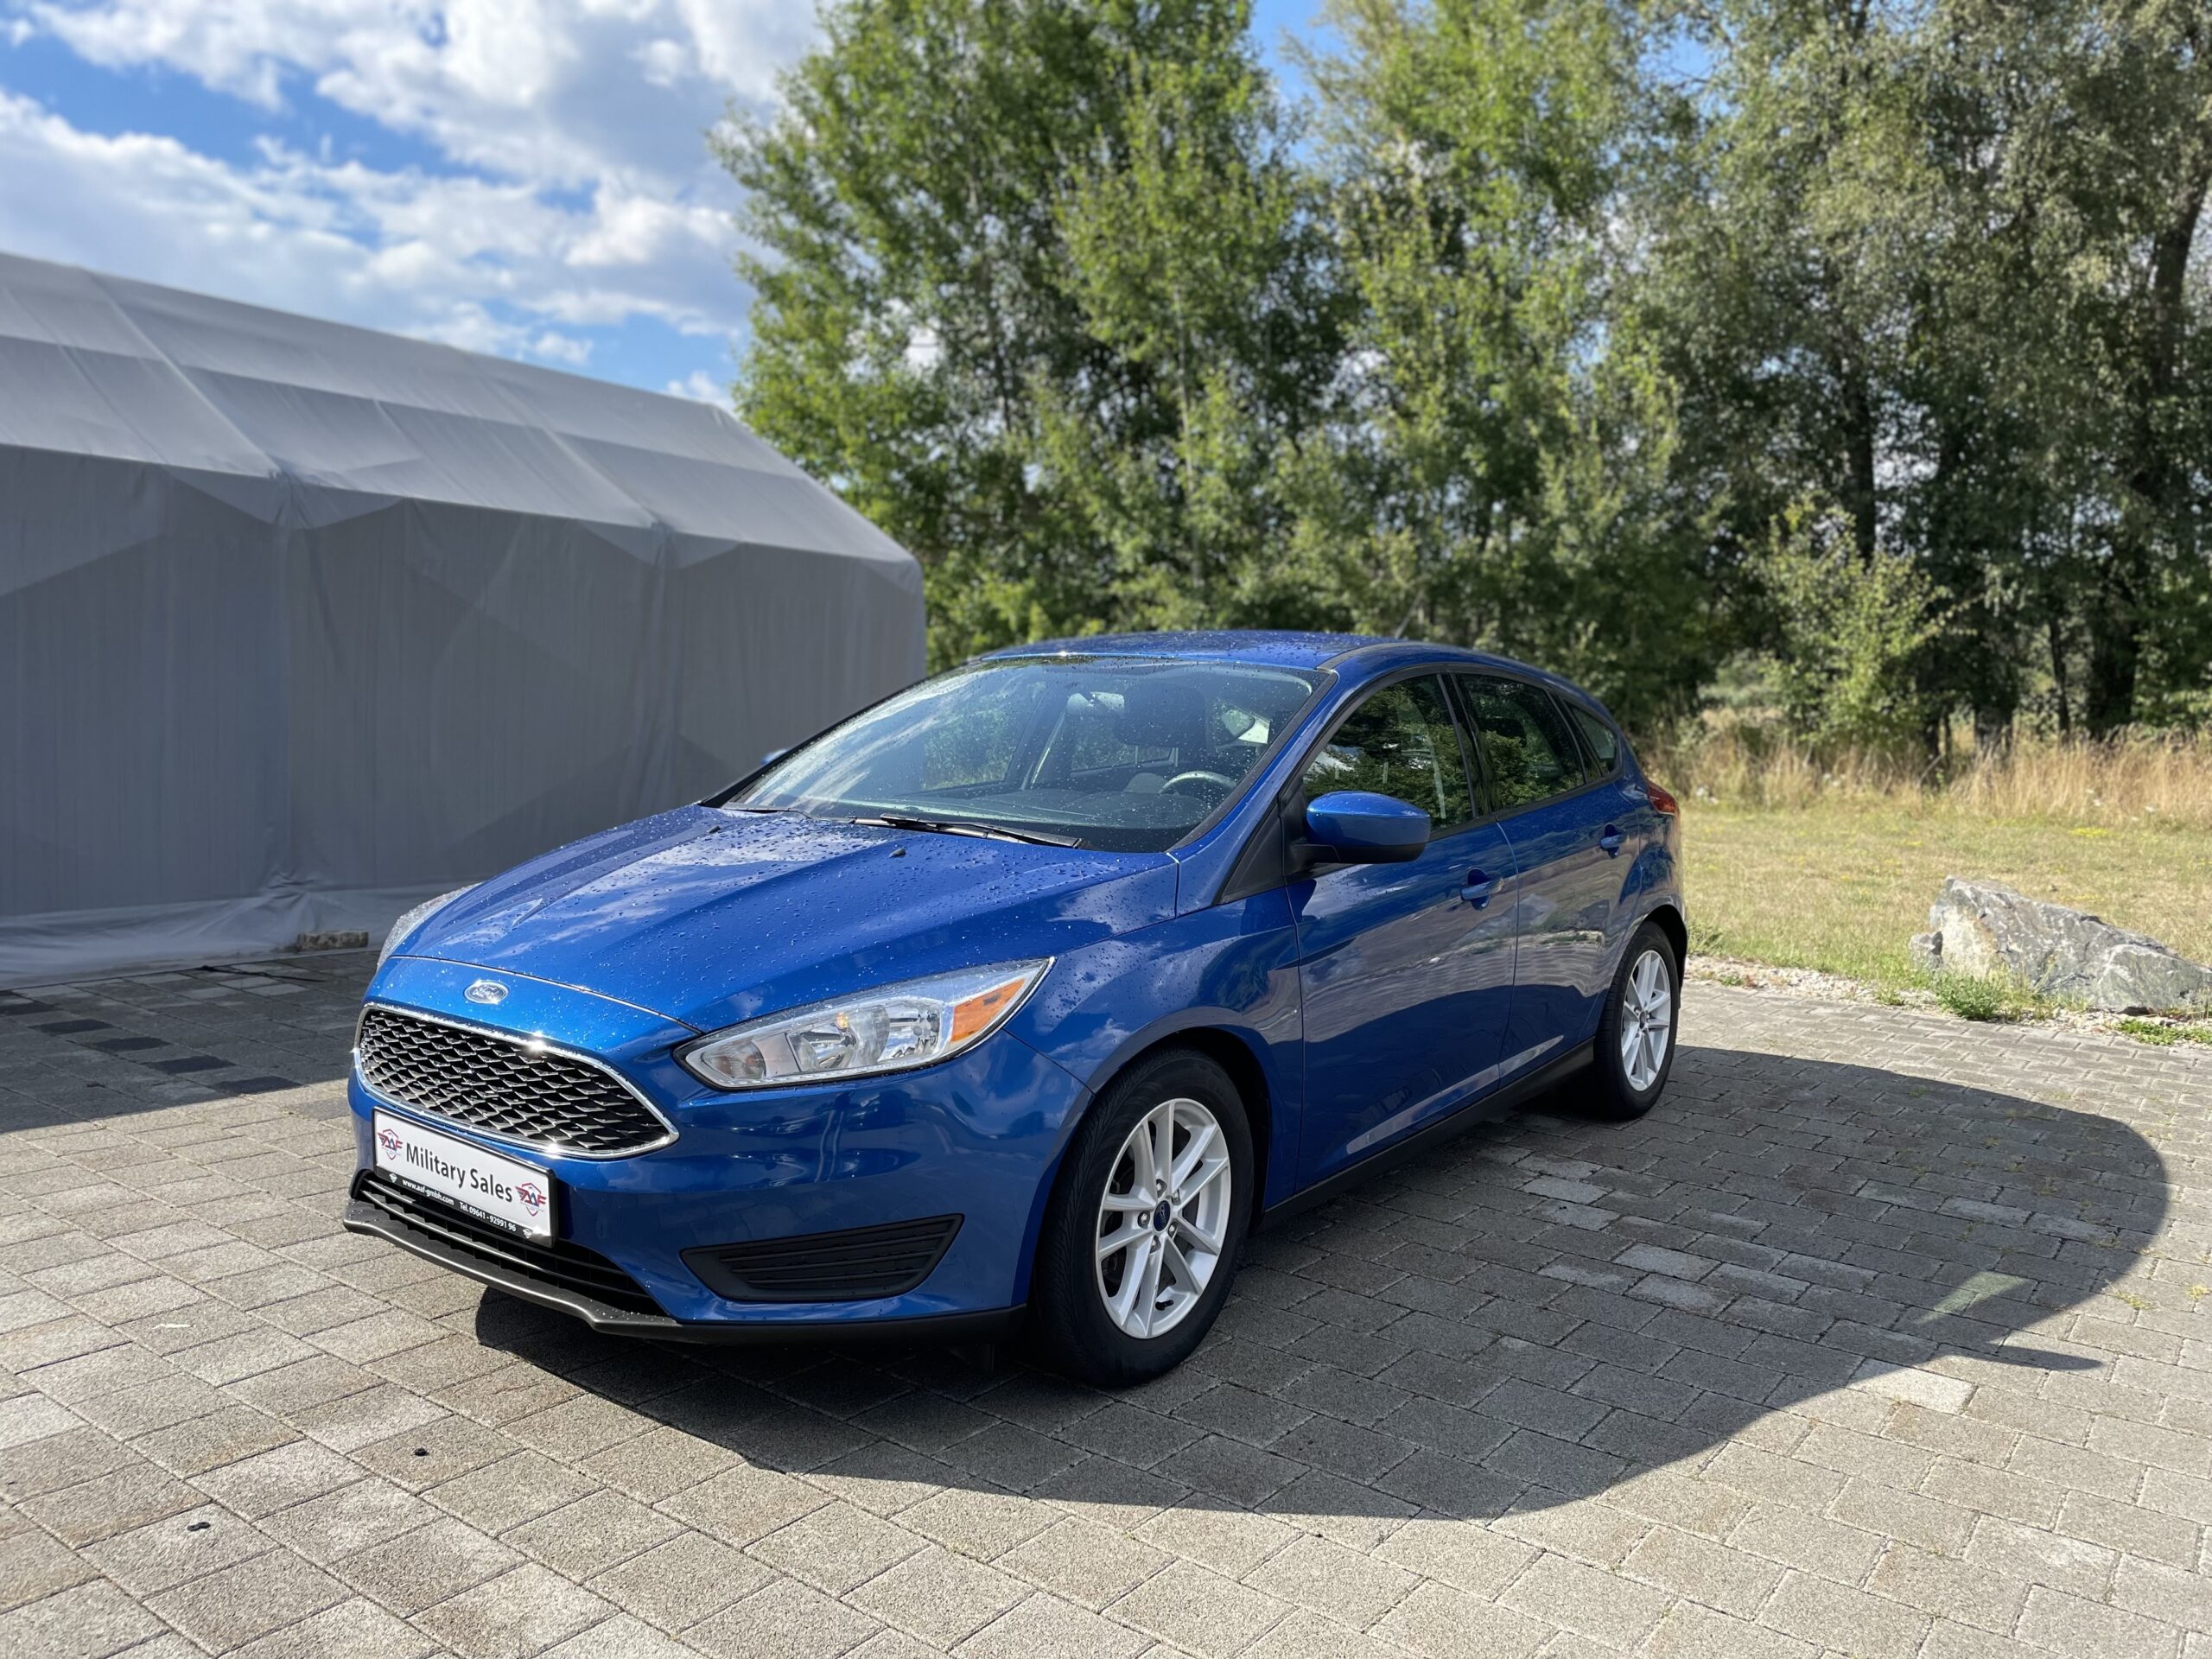 2018 Ford Focus <br>FWD</br>as low as </br>$162per paycheck